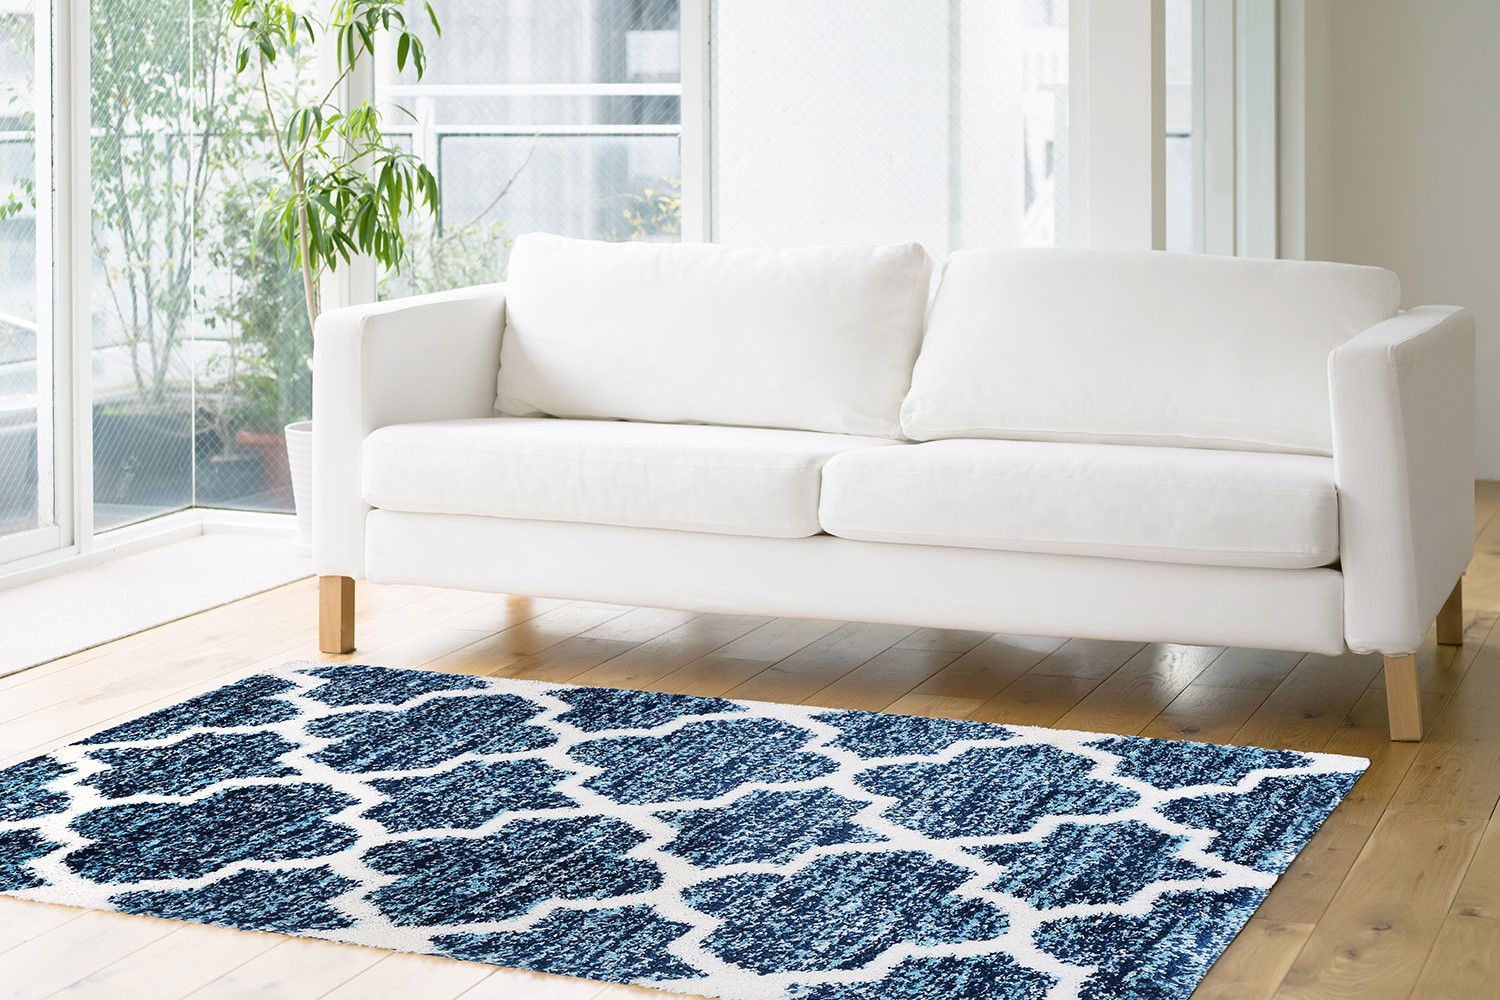 Best Rugs For Living Room
 Small Living Room Ideas on a Bud